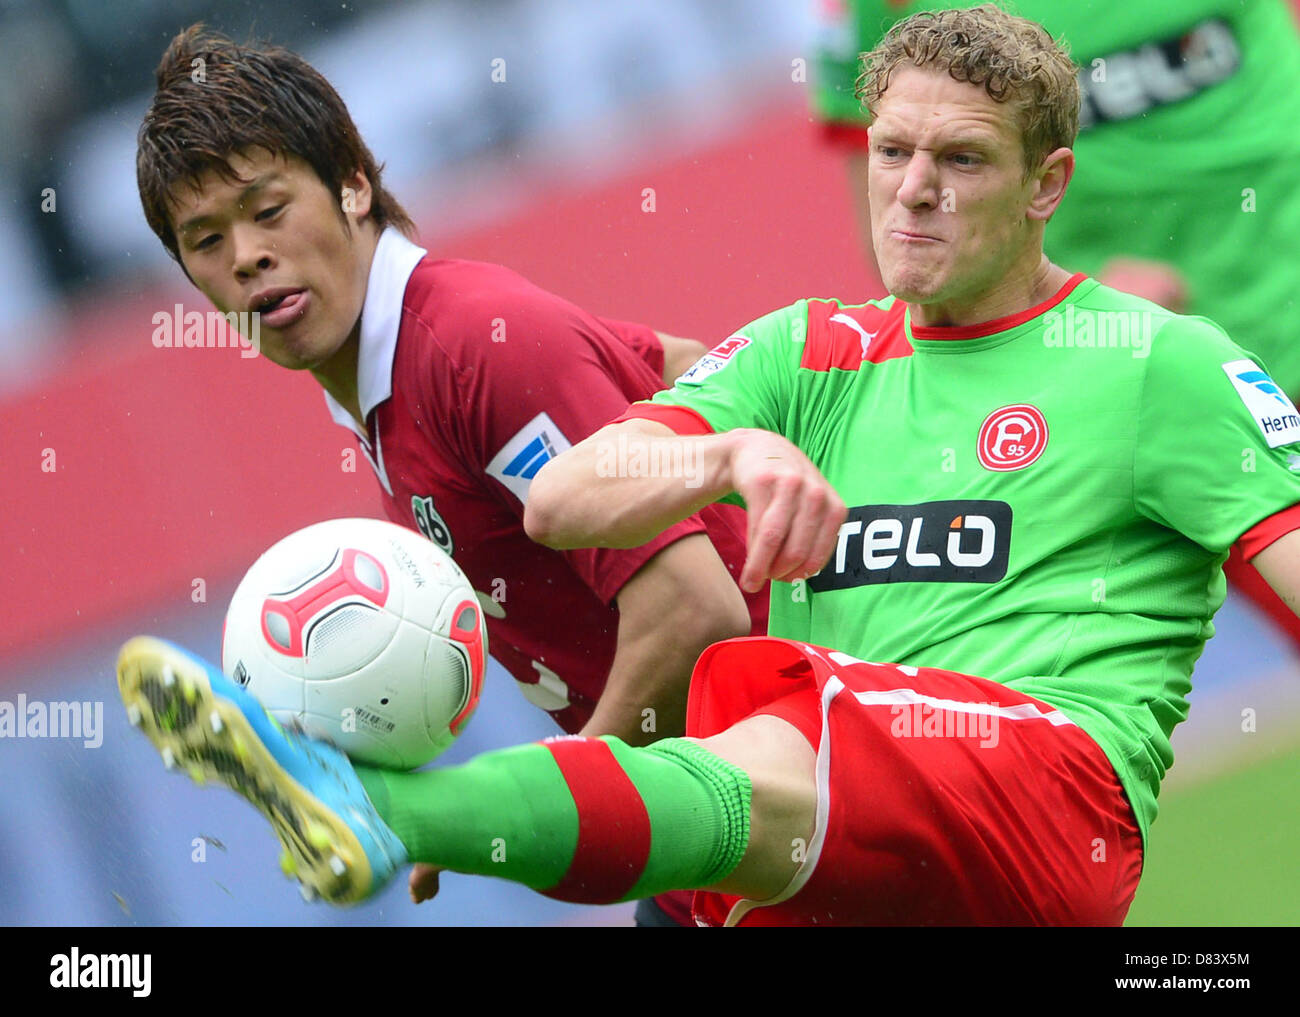 Hanover's Hiroki Sakai (L) vies for the ball with Duesseldorf's Johannes van den Bergh during the Bundesliga soccer match between Hanover 96 and Fortuna Duesseldorf at AWD Arena in Hanover, Germany, 18 May 2013. Photo: PETER STEFFEN (ATTENTION: EMBARGO CONDITIONS! The DFL permits the further utilisation of up to 15 pictures only (no sequntial pictures or video-similar series of pictures allowed) via the internet and online media during the match (including halftime), taken from inside the stadium and/or prior to the start of the match. The DFL permits the unrestricted transmission of digitised Stock Photo